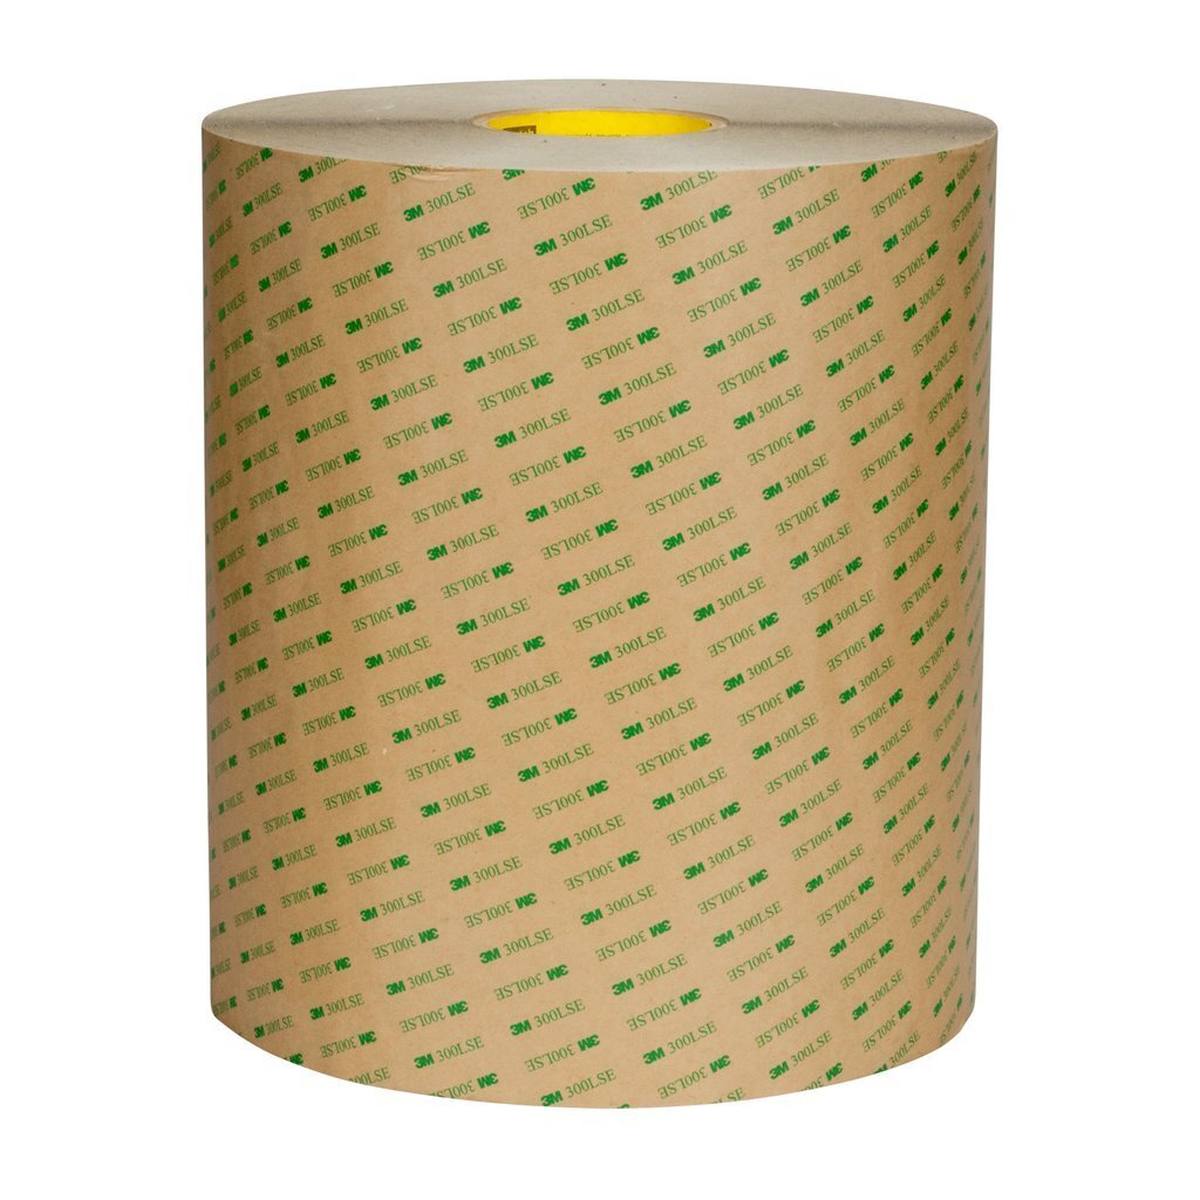 3M Double-sided adhesive tape with polyester backing 93020LE, transparent, 1372 mm x 55 m, 0.20 mm